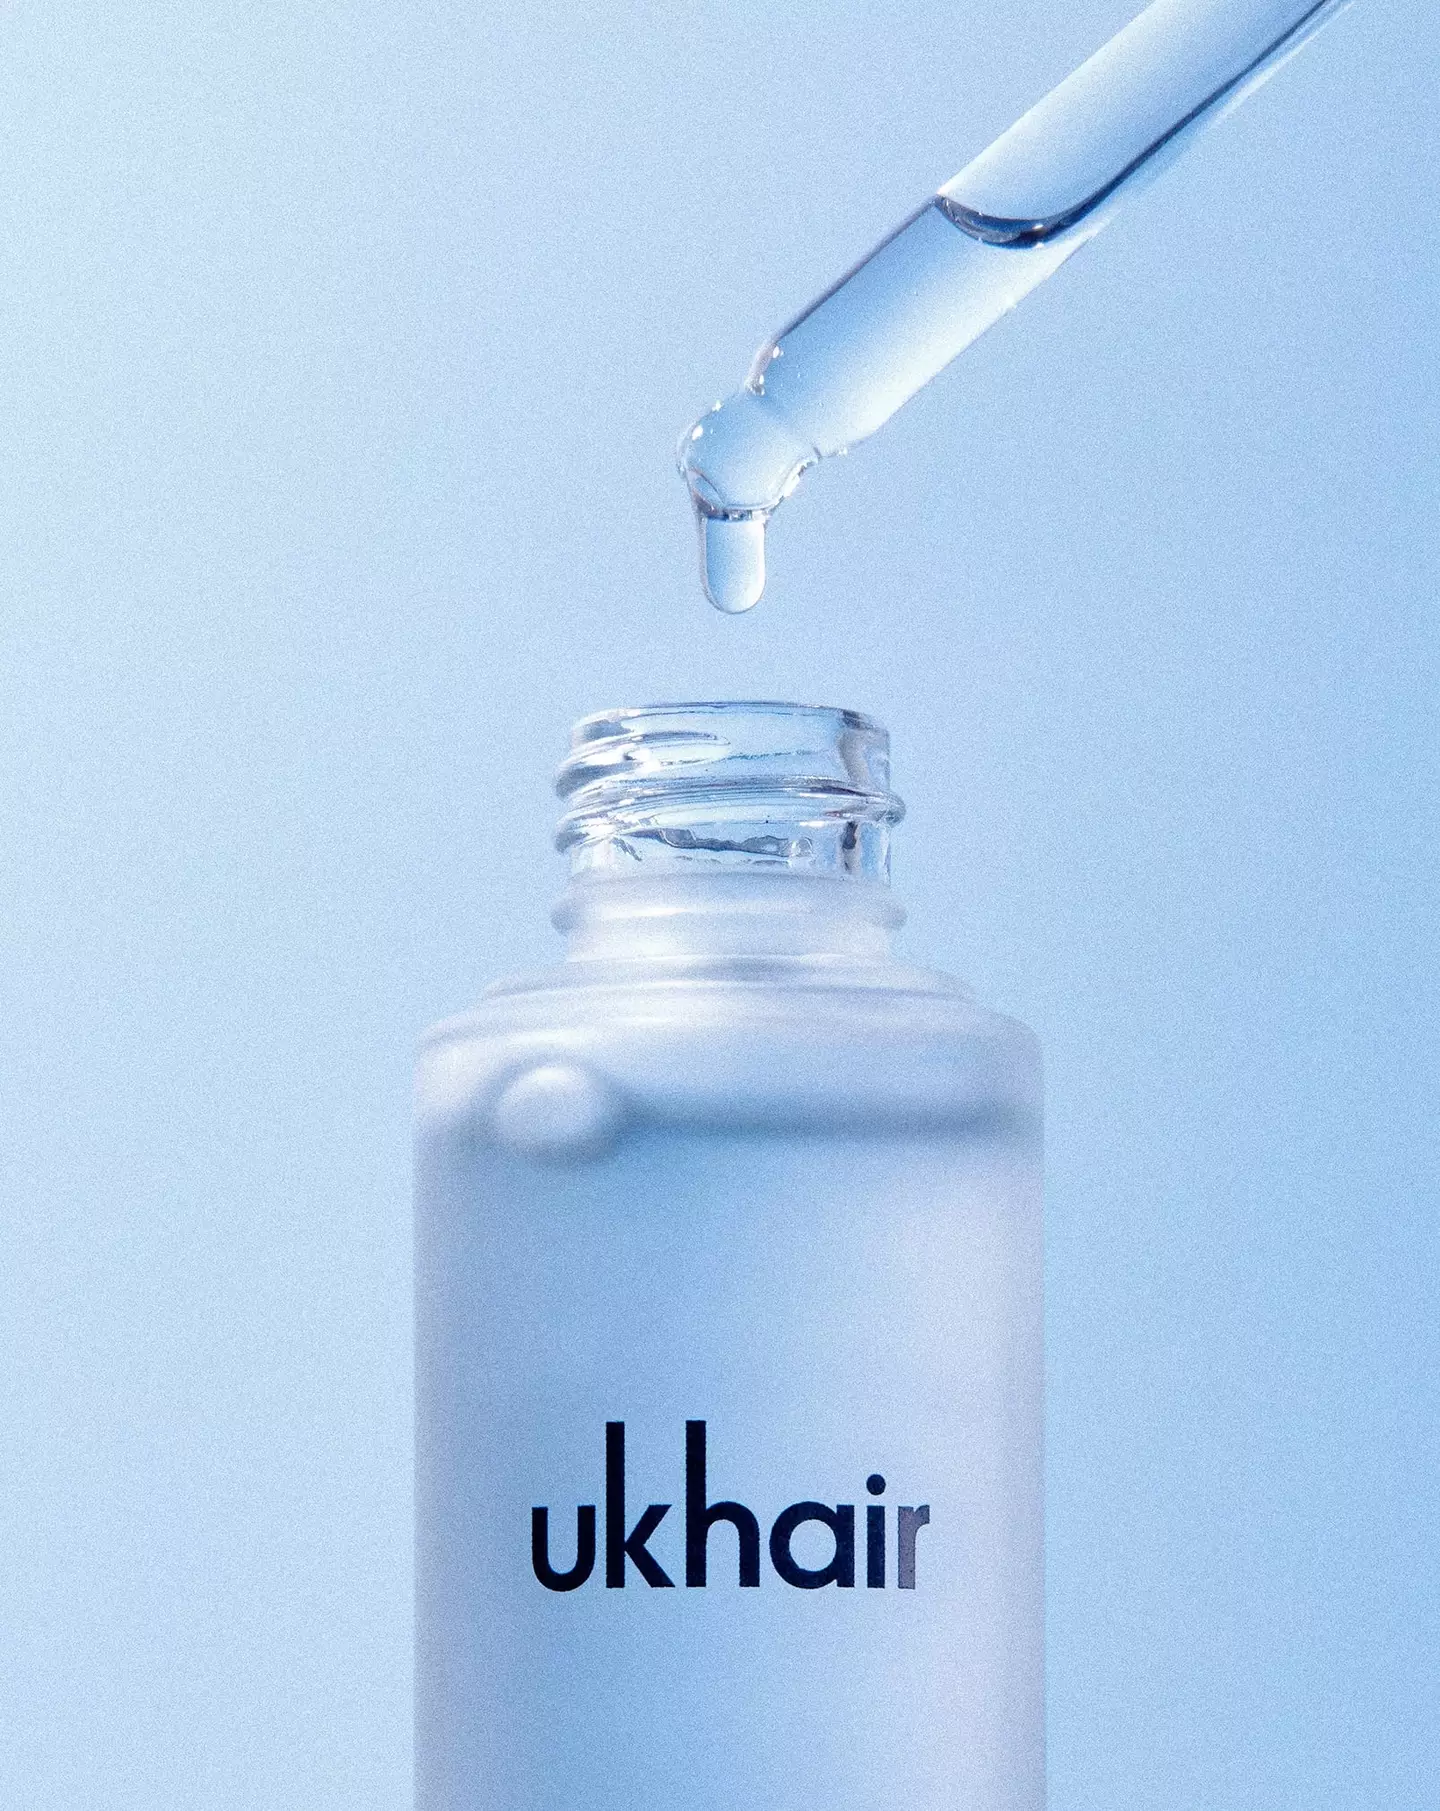 A dropper applicator makes it easy to apply the hair serum directly to the scalp and hairline.